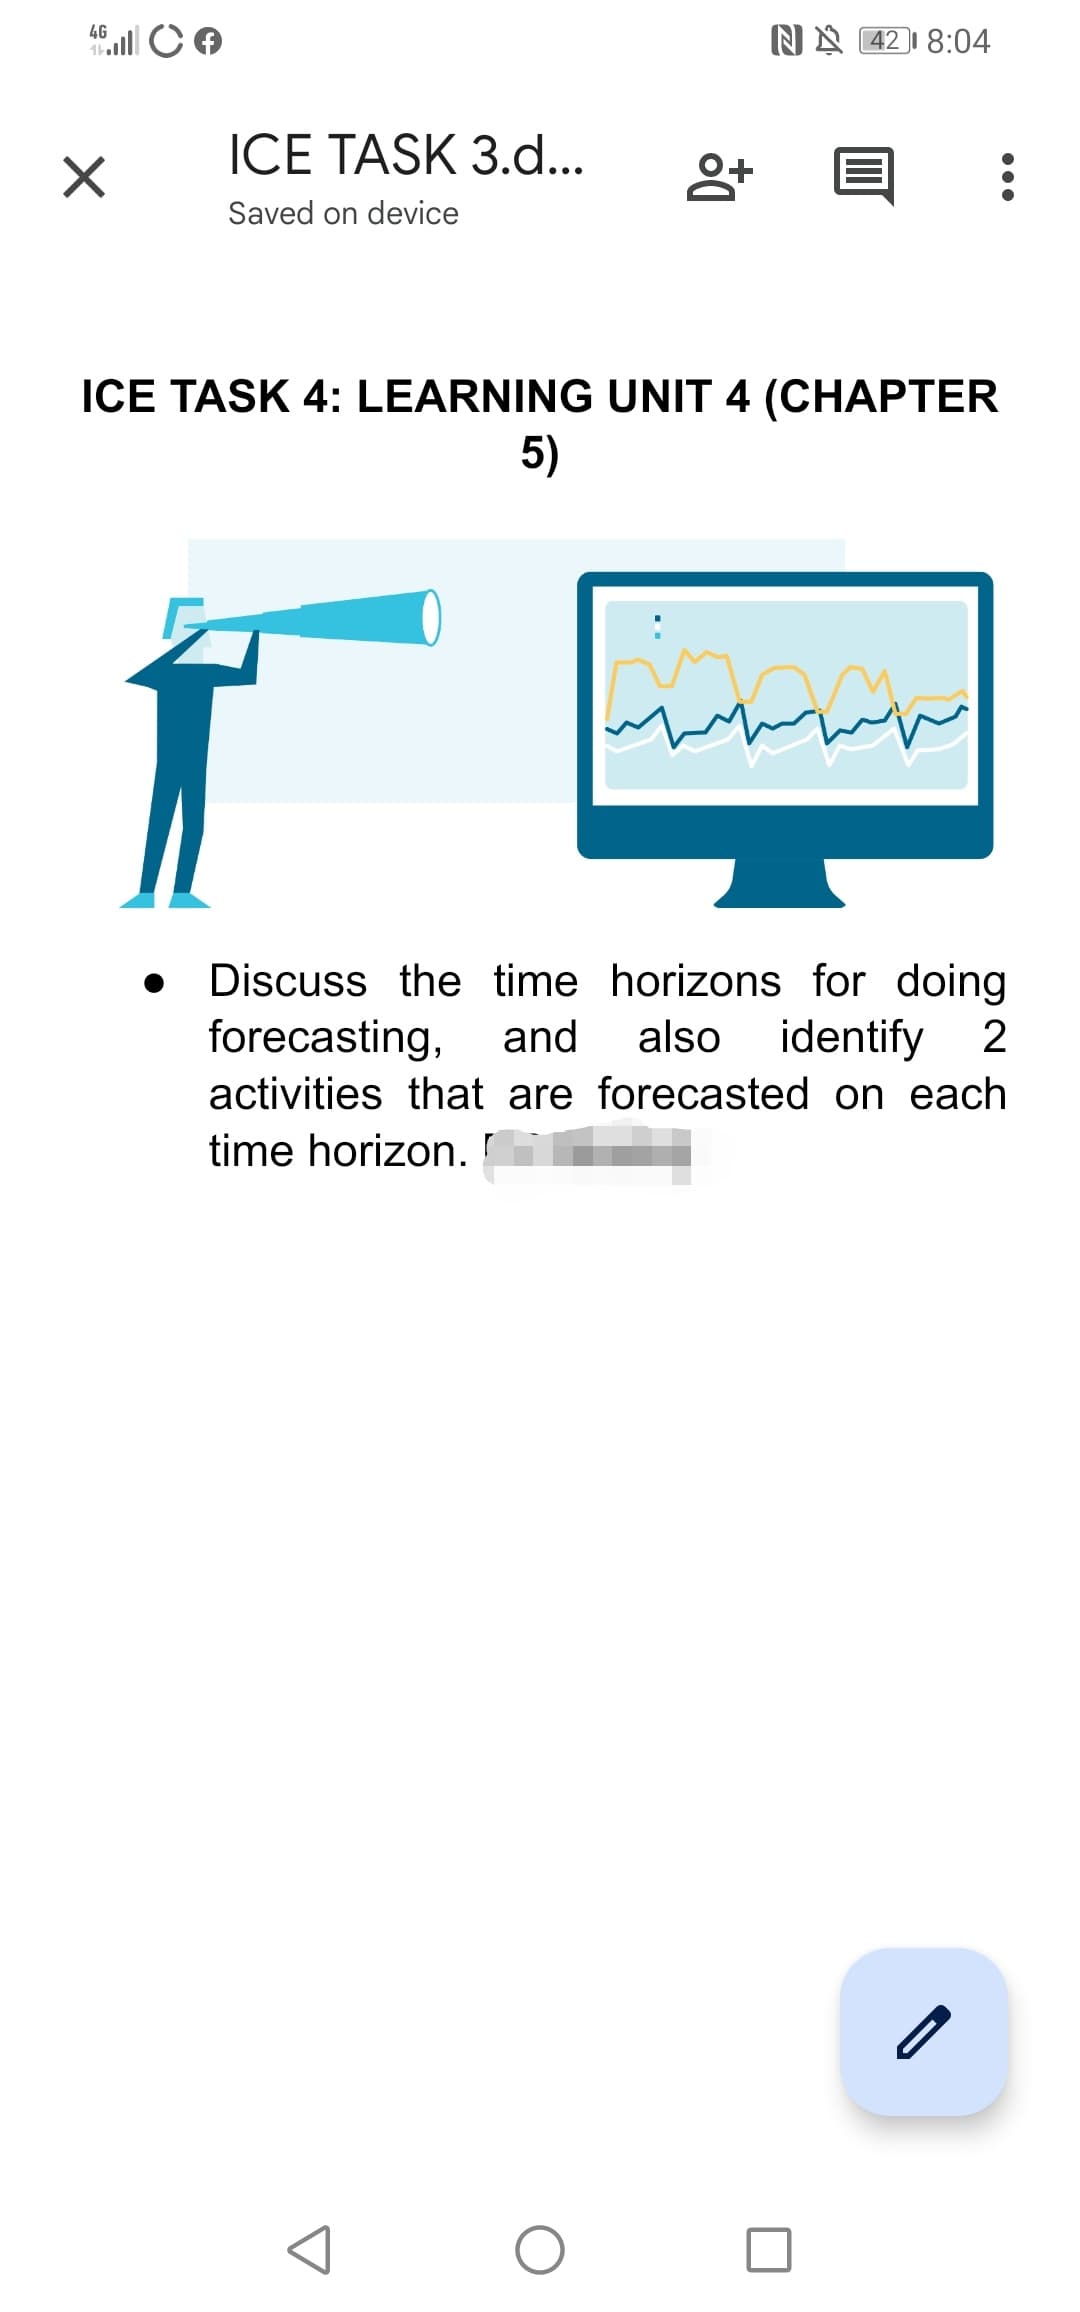 4G
NN 42 I 8:04
ICE TASK 3.d...
Saved on device
ICE TASK 4: LEARNING UNIT 4 (CHAPTER
5)
Discuss the time horizons for doing
forecasting,
and
also identify 2
activities that are forecasted on each
time horizon.
